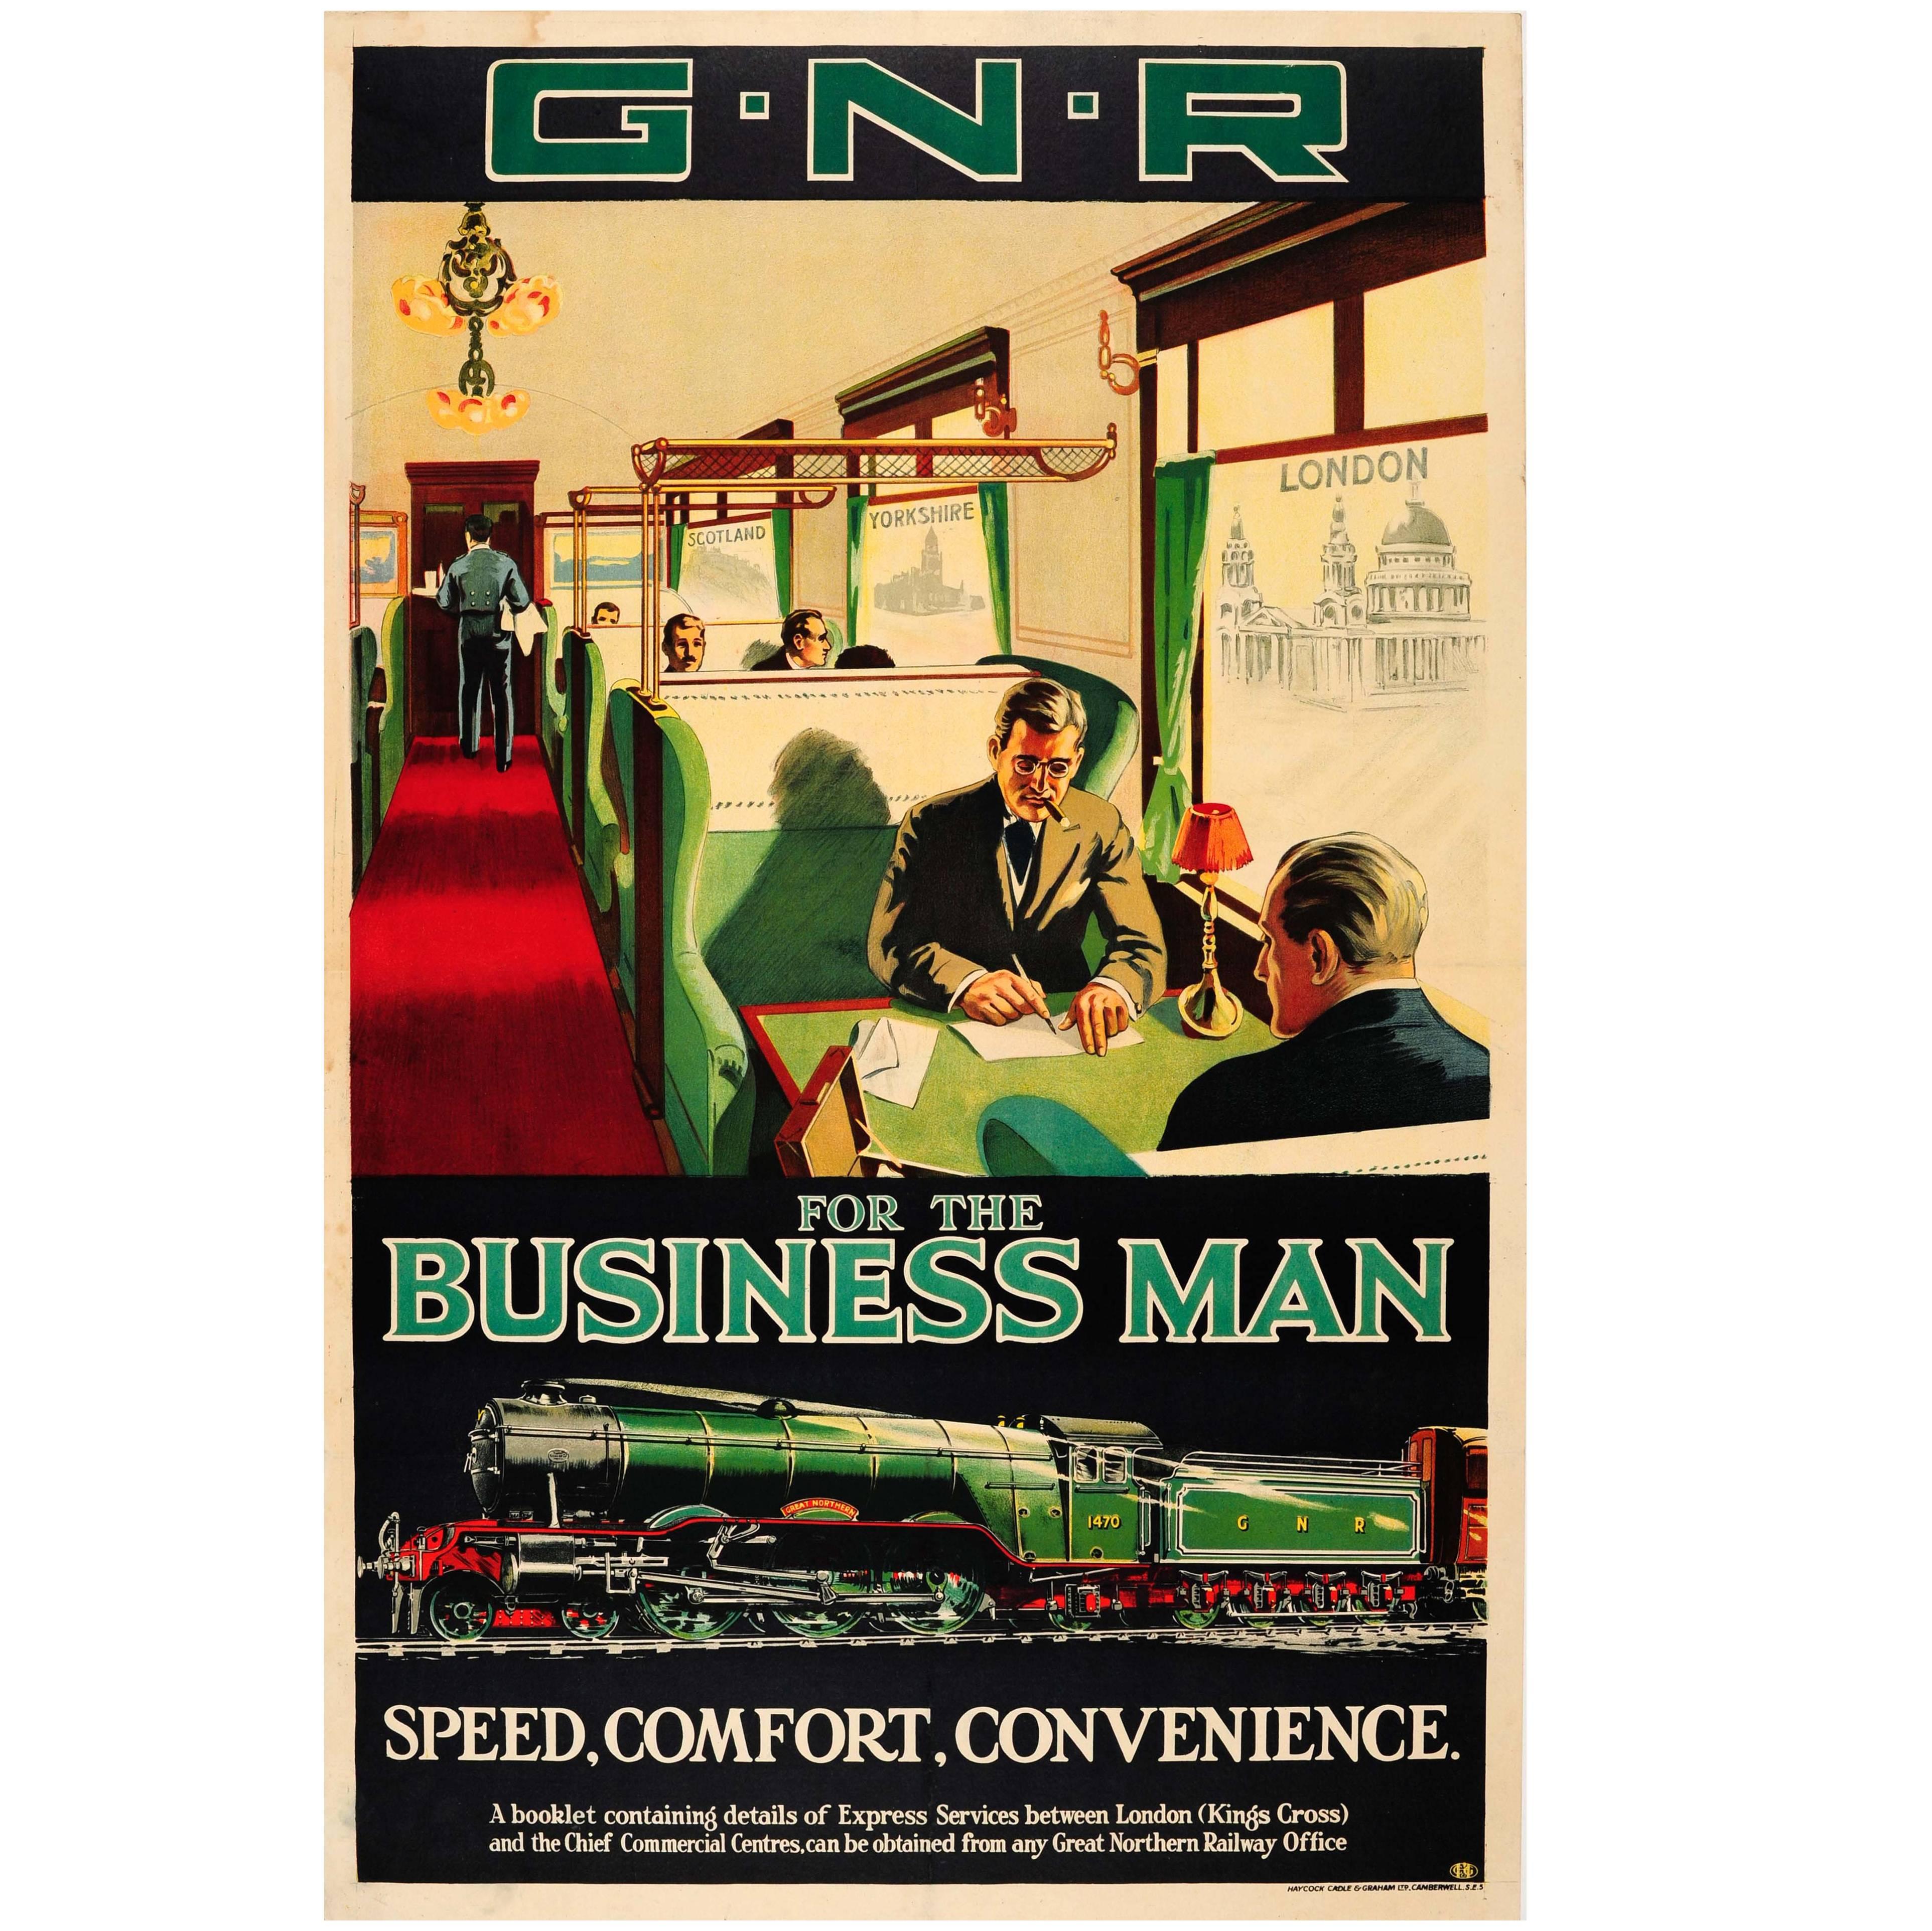 Original Vintage Great Northern Railway Poster "G.N.R. for the Business Man"